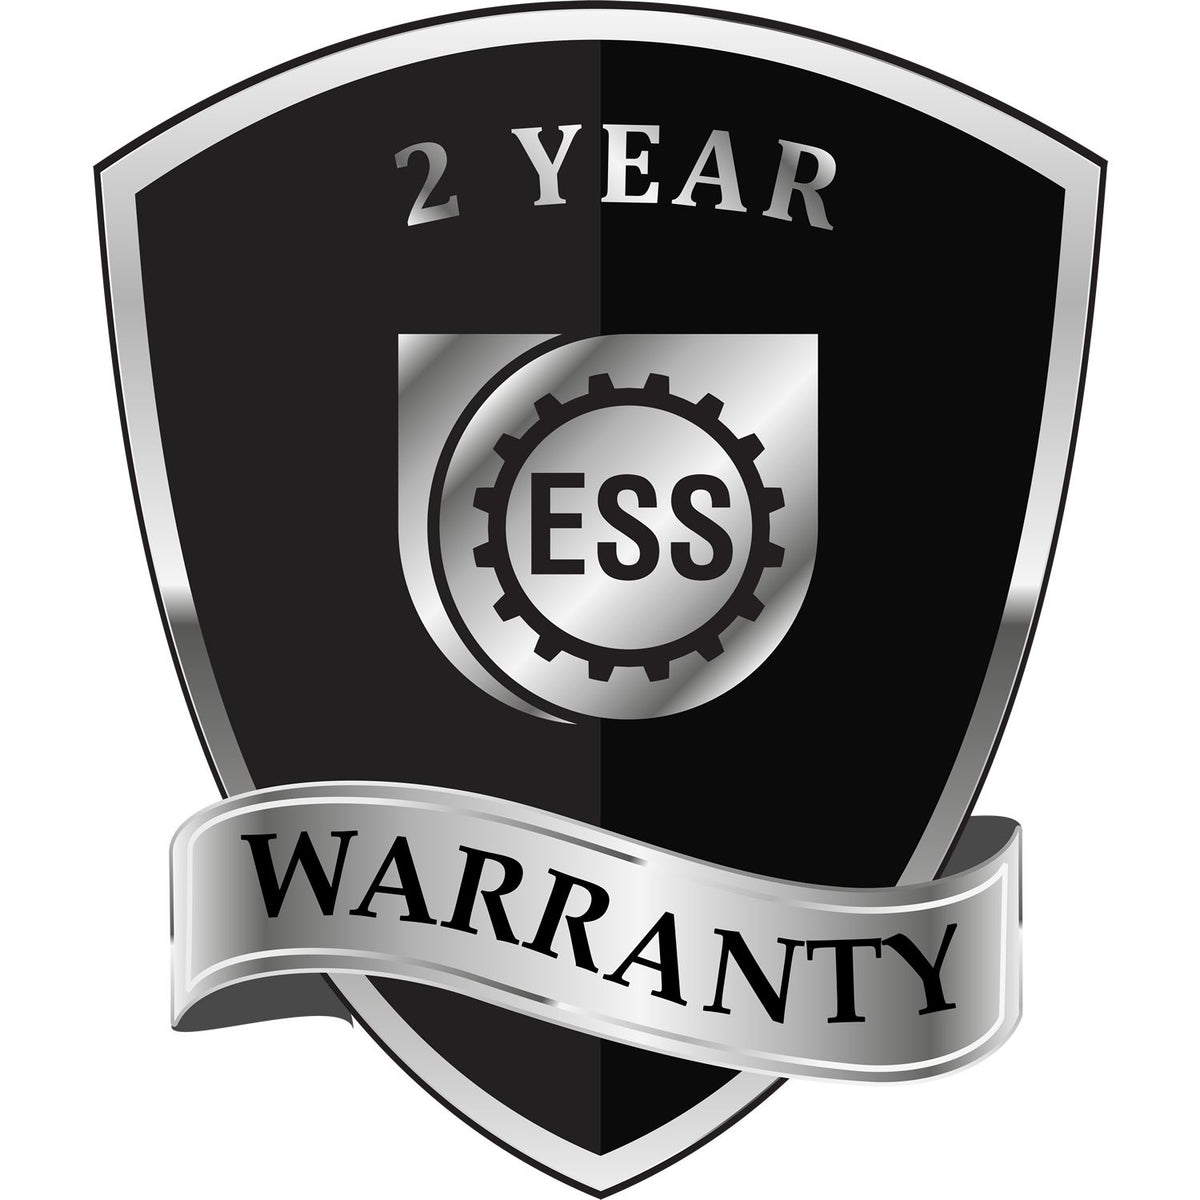 A badge or emblem showing a warranty icon for the Maine Engineer Desk Seal